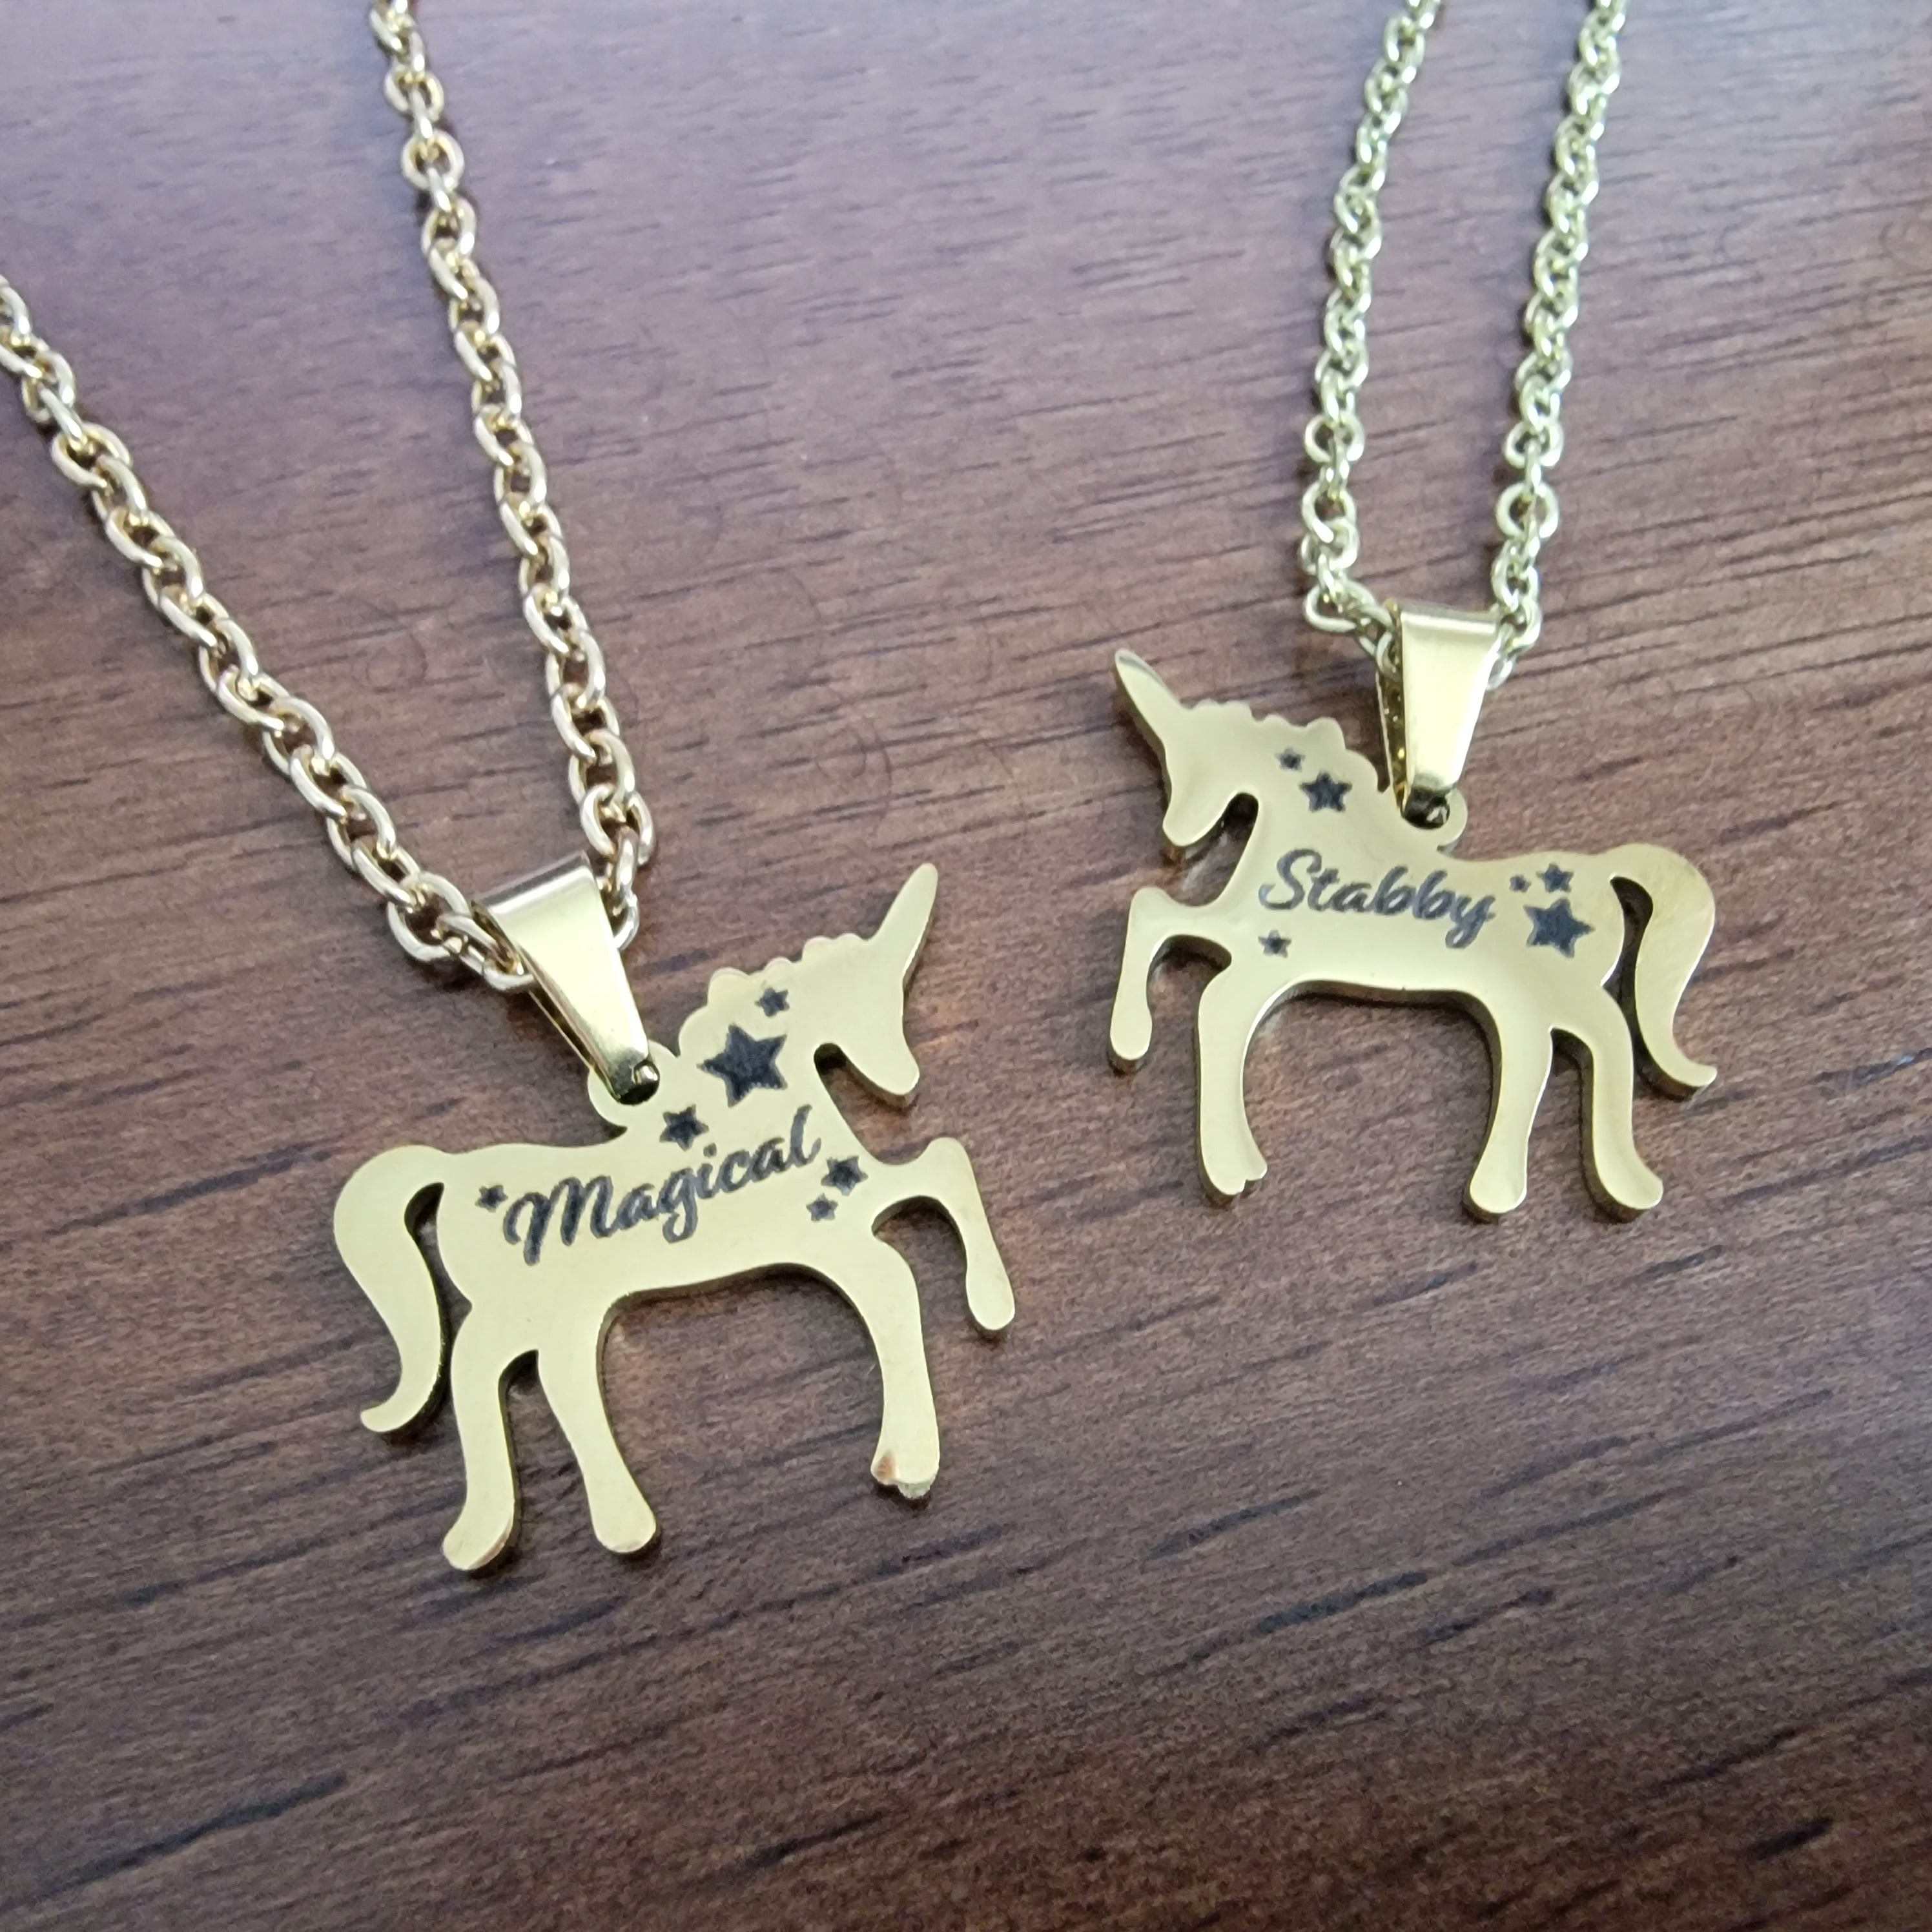 Magical Stabby Reversible Unicorn Necklace